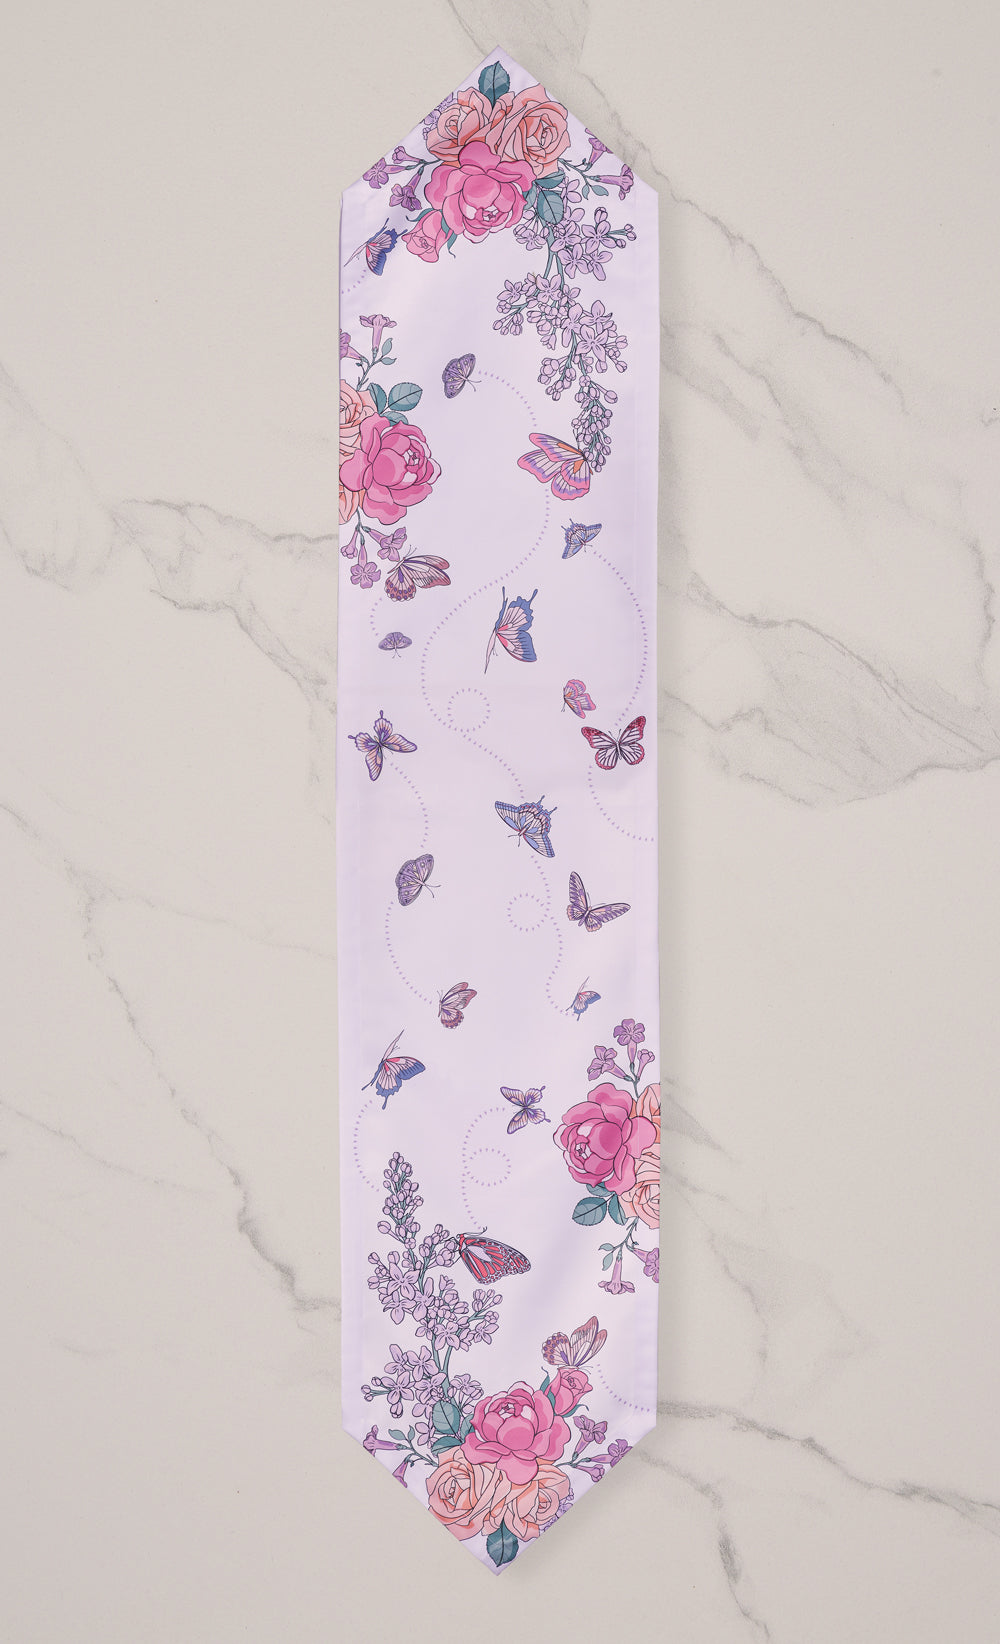 The Butterfly dUCk Table Runners in Flourish